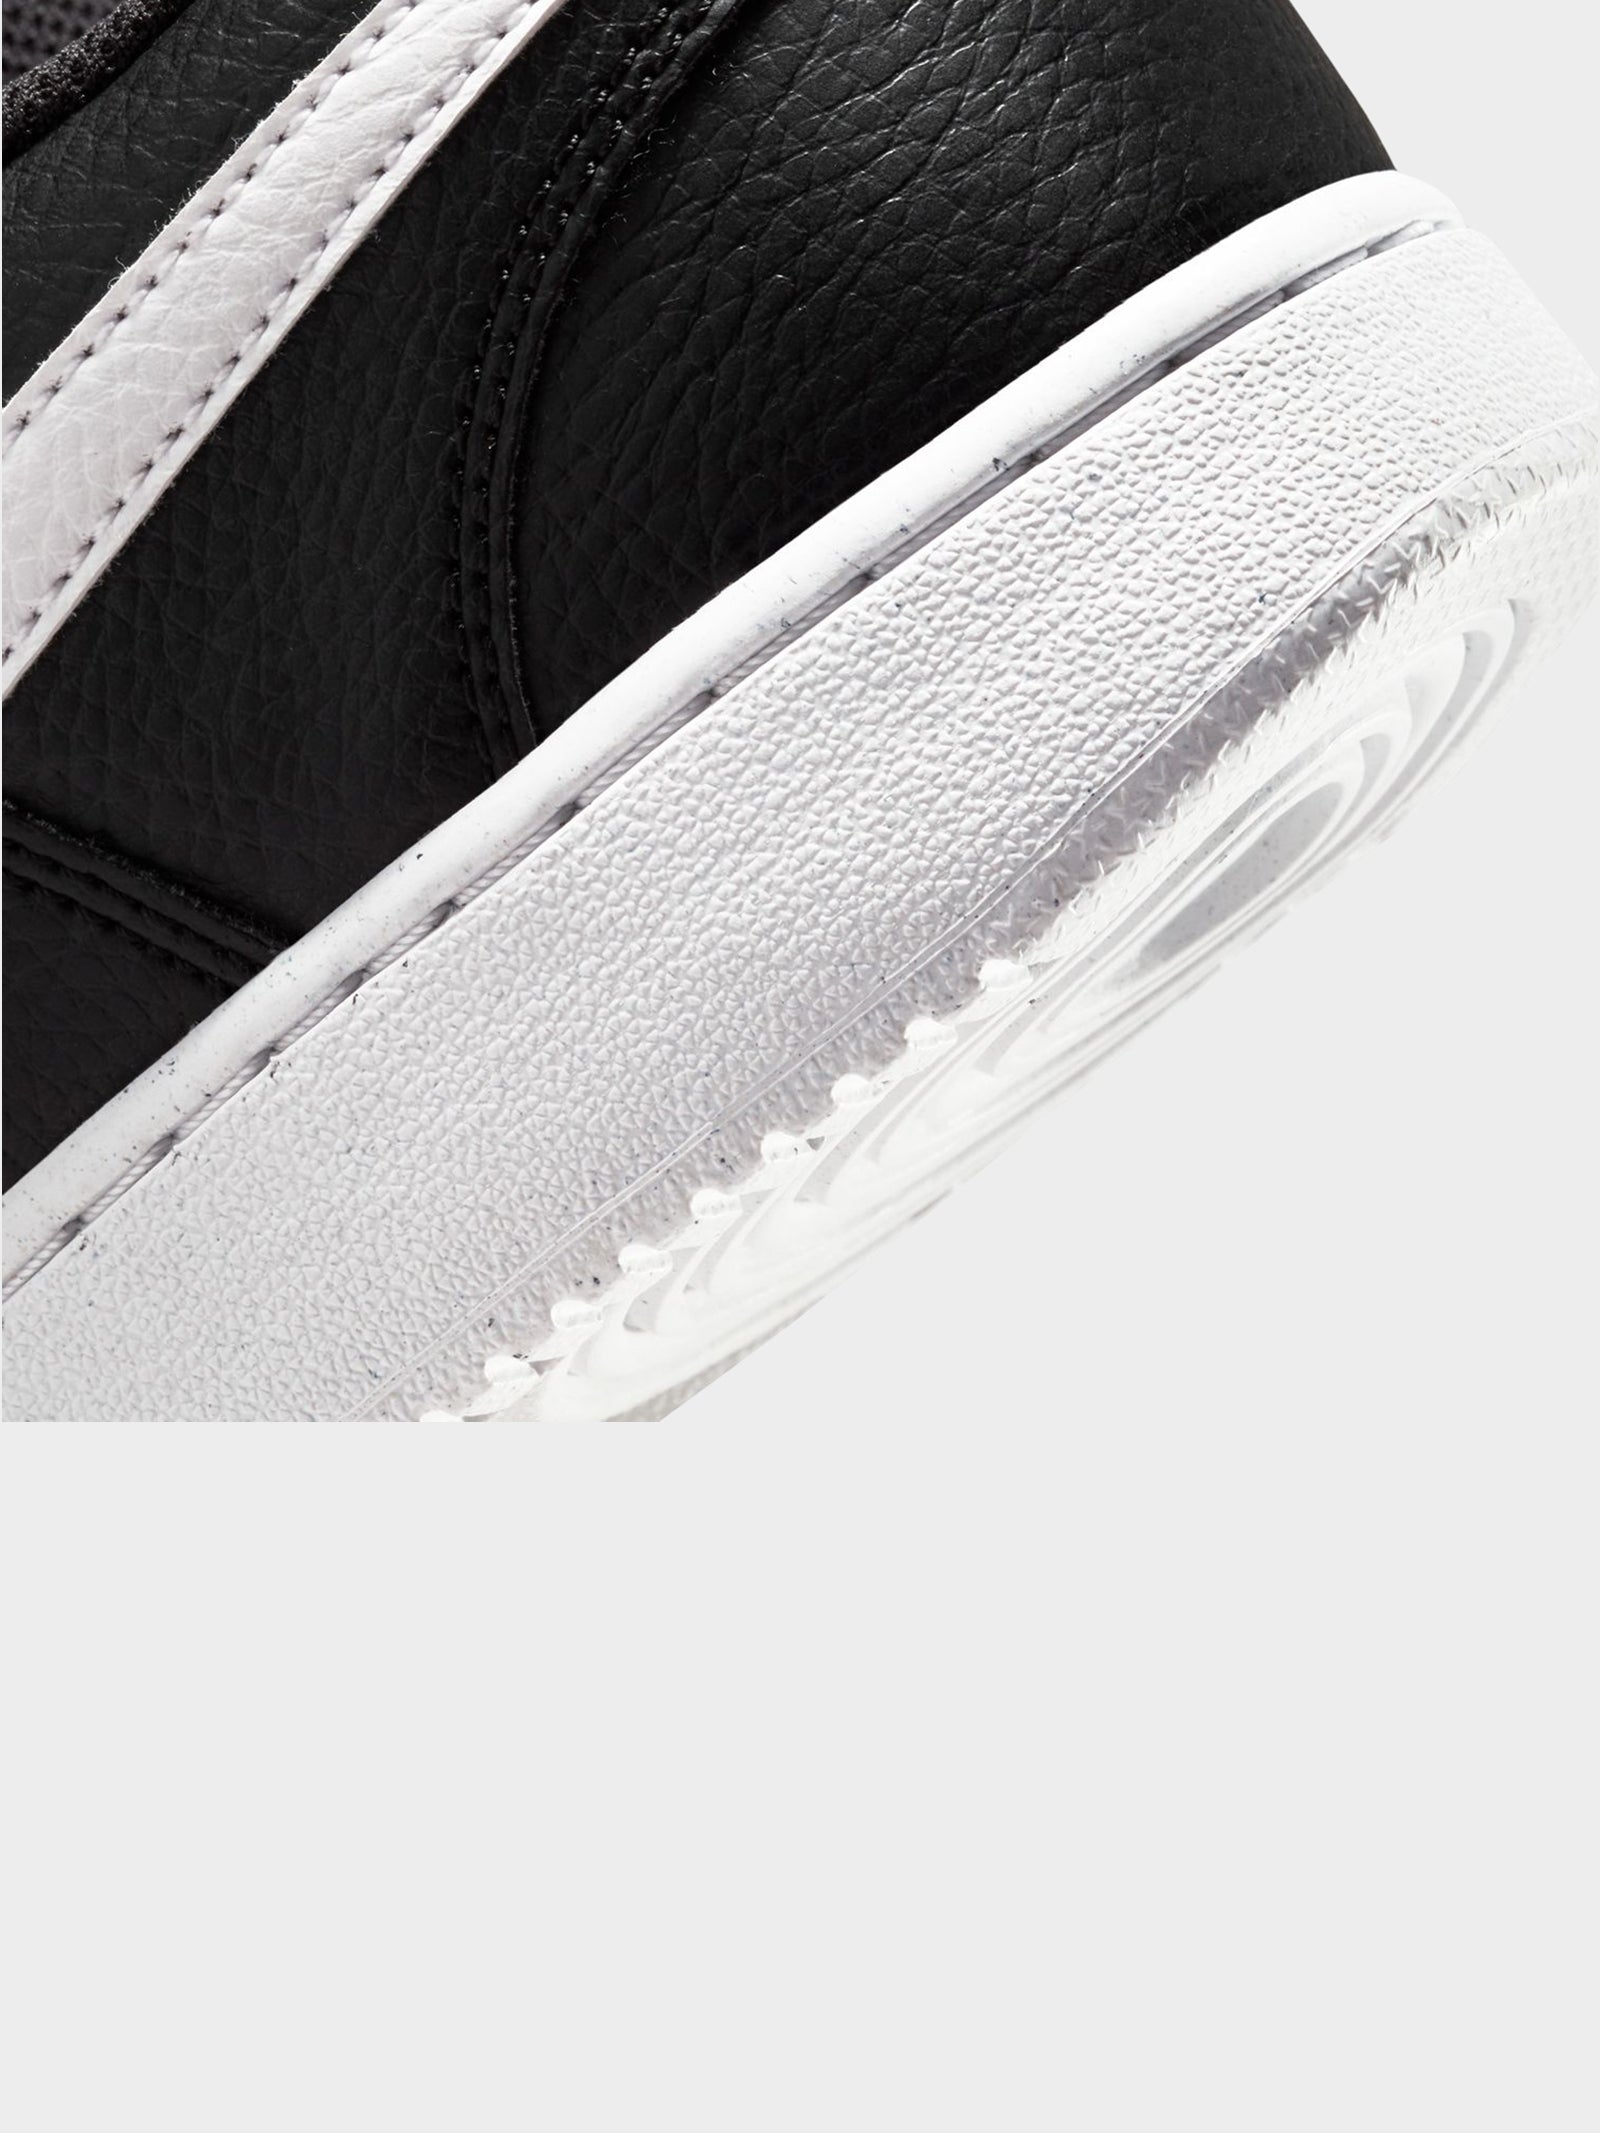 Mens Court Vision Low Sneakers in Black & White